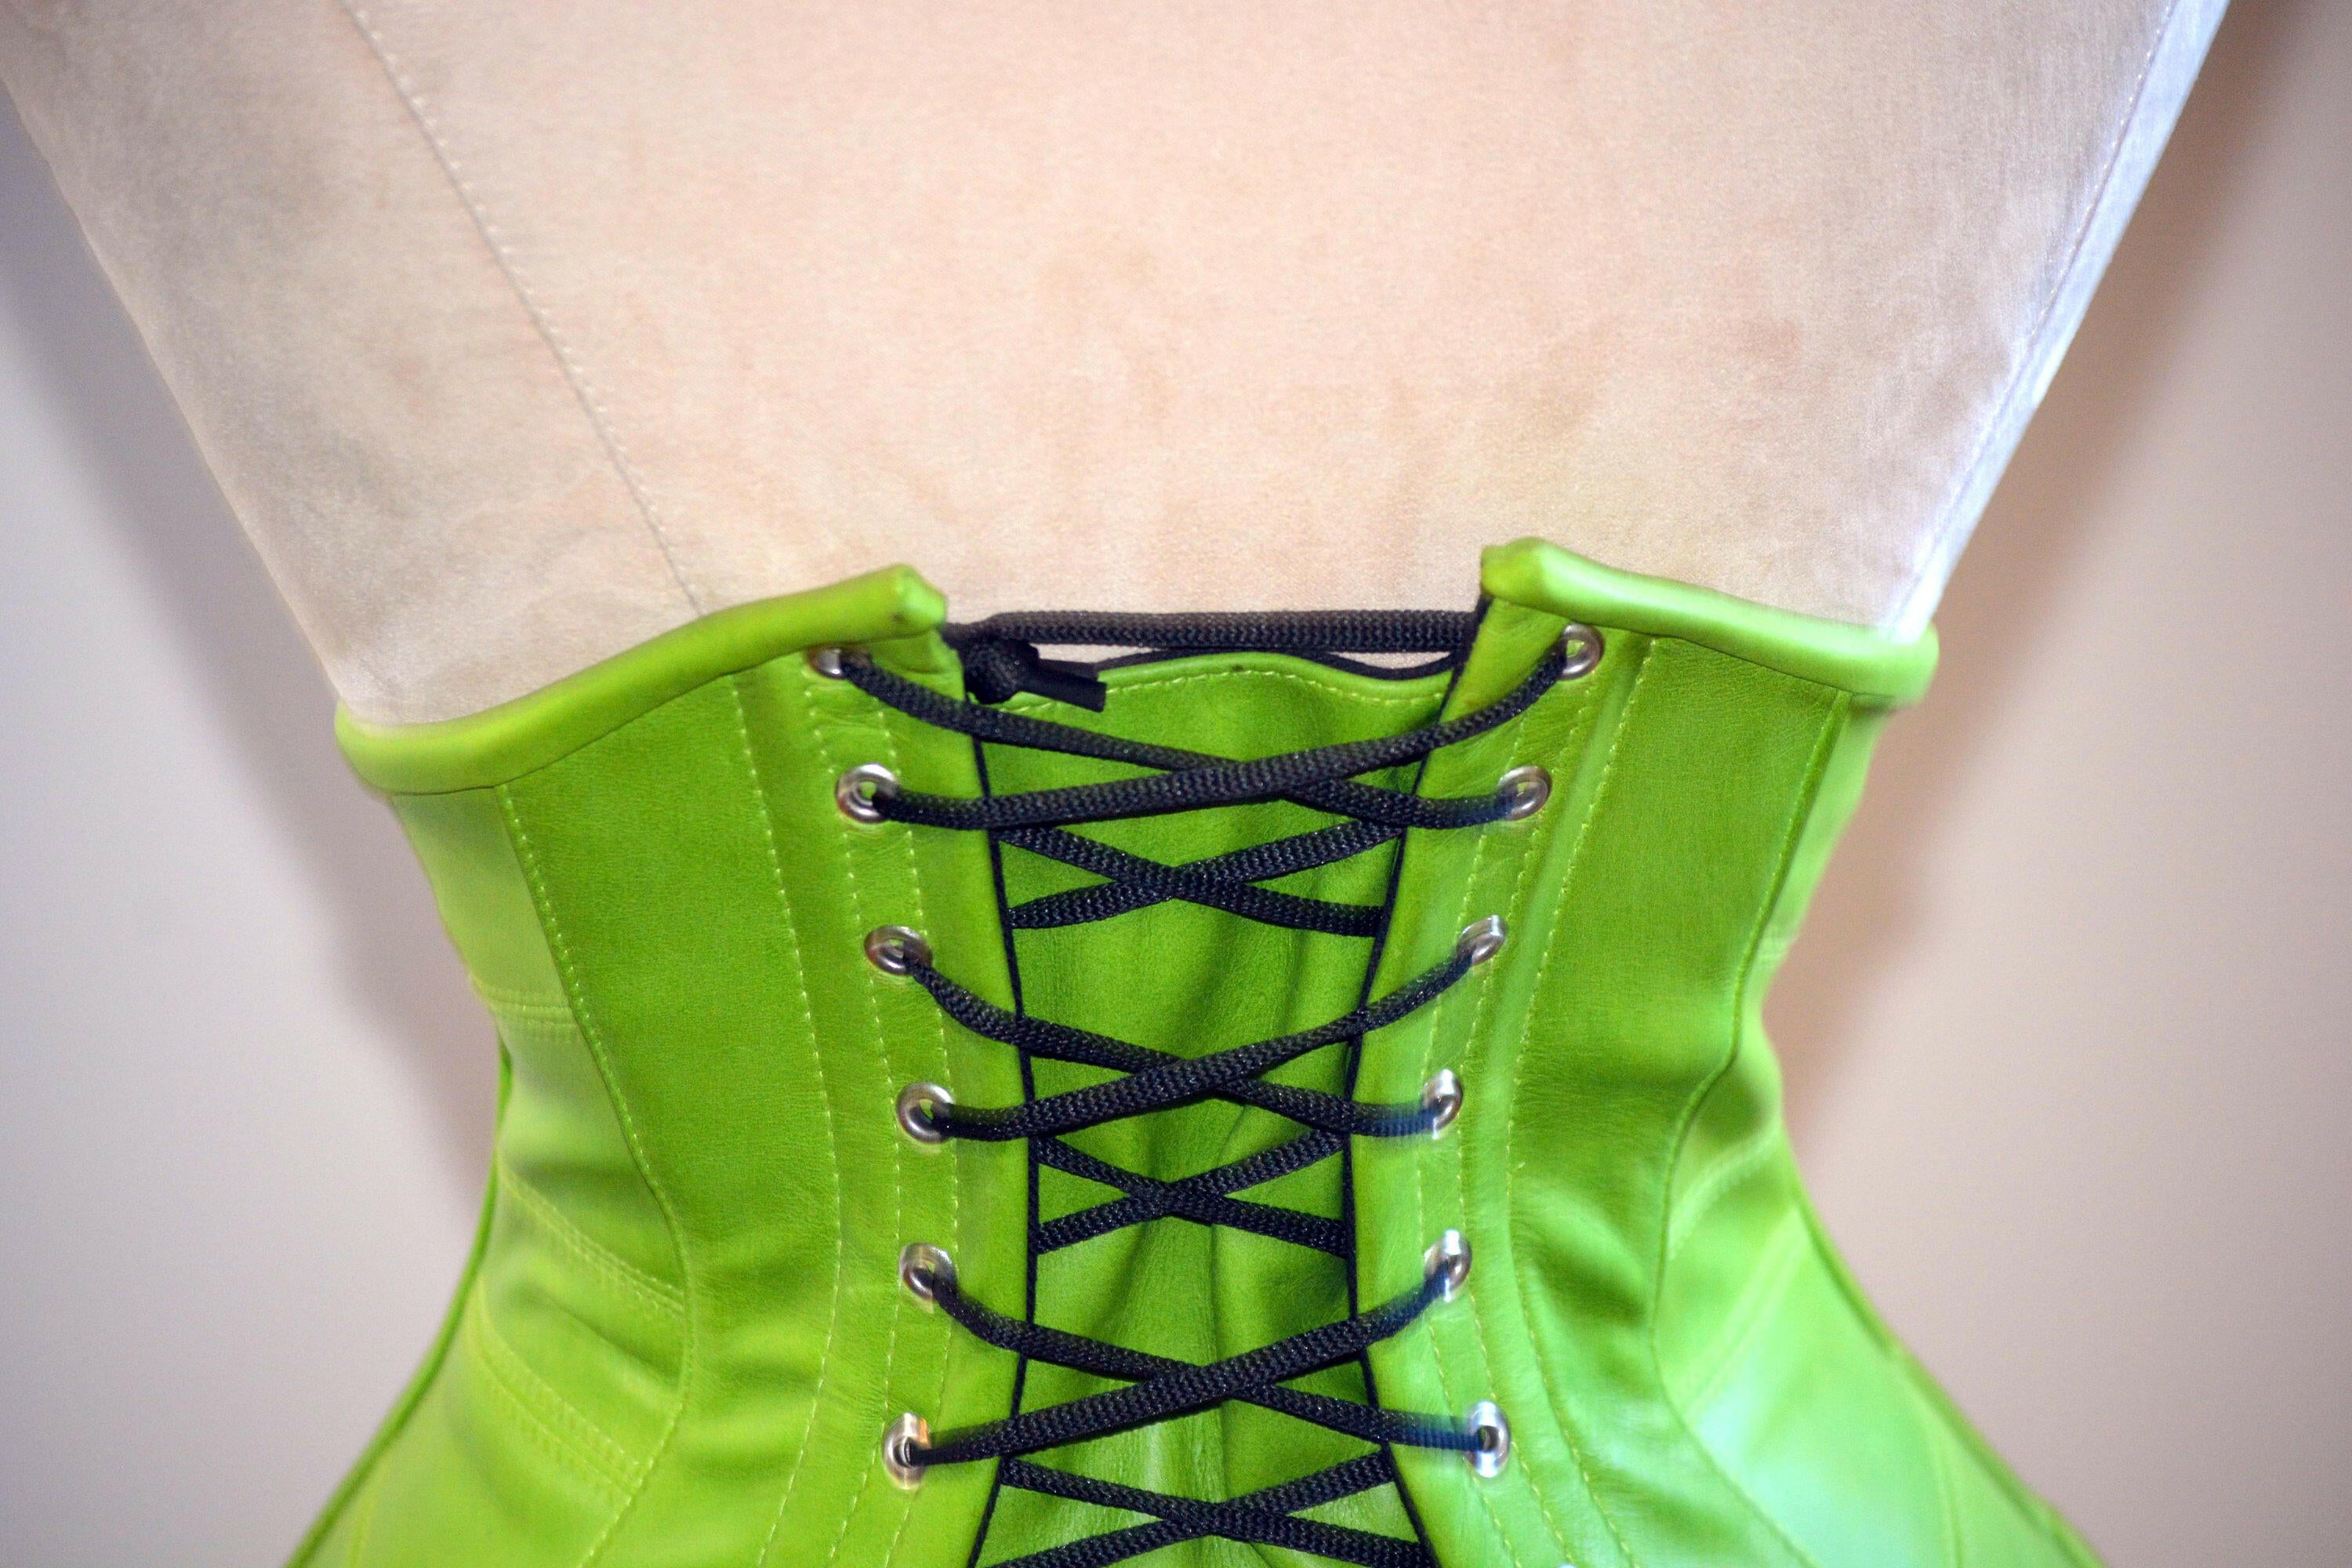 Real leather halfbust steel-boned authentic heavy corset, different colors,  waist training corset.